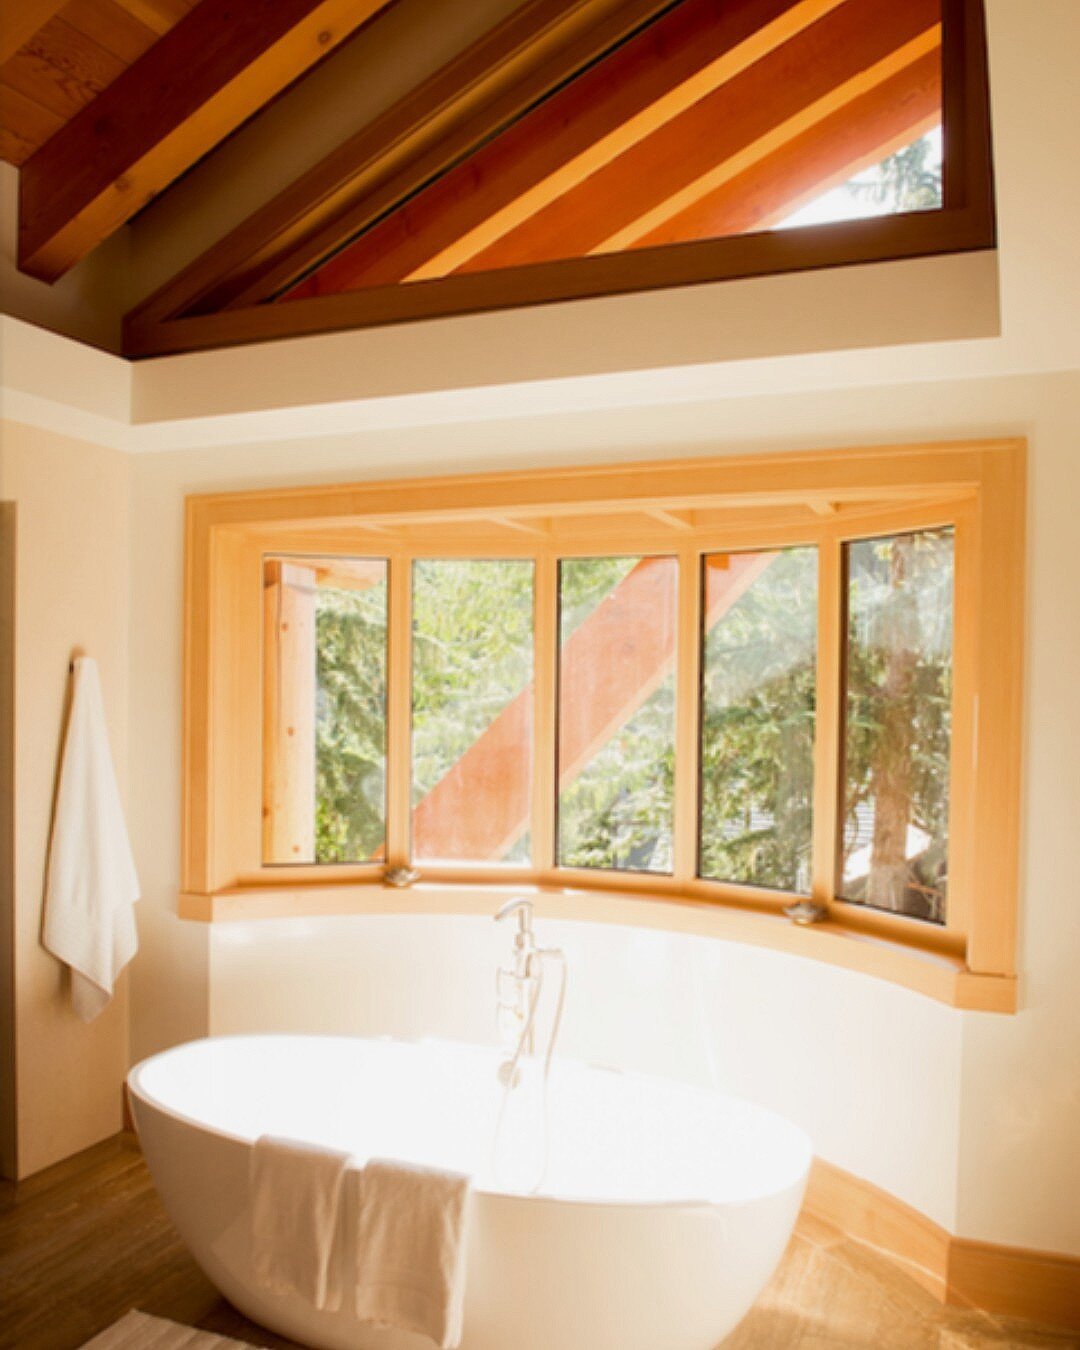 Soaking in a beautiful bathtub, and bathing in natural light. What could be better? 

#whistlercabin #seatosky #custommillworkwhistler #hardwood #interiordesign #millwork #woodwork #squamish #whistler #beautiful #love #custom #inspiration